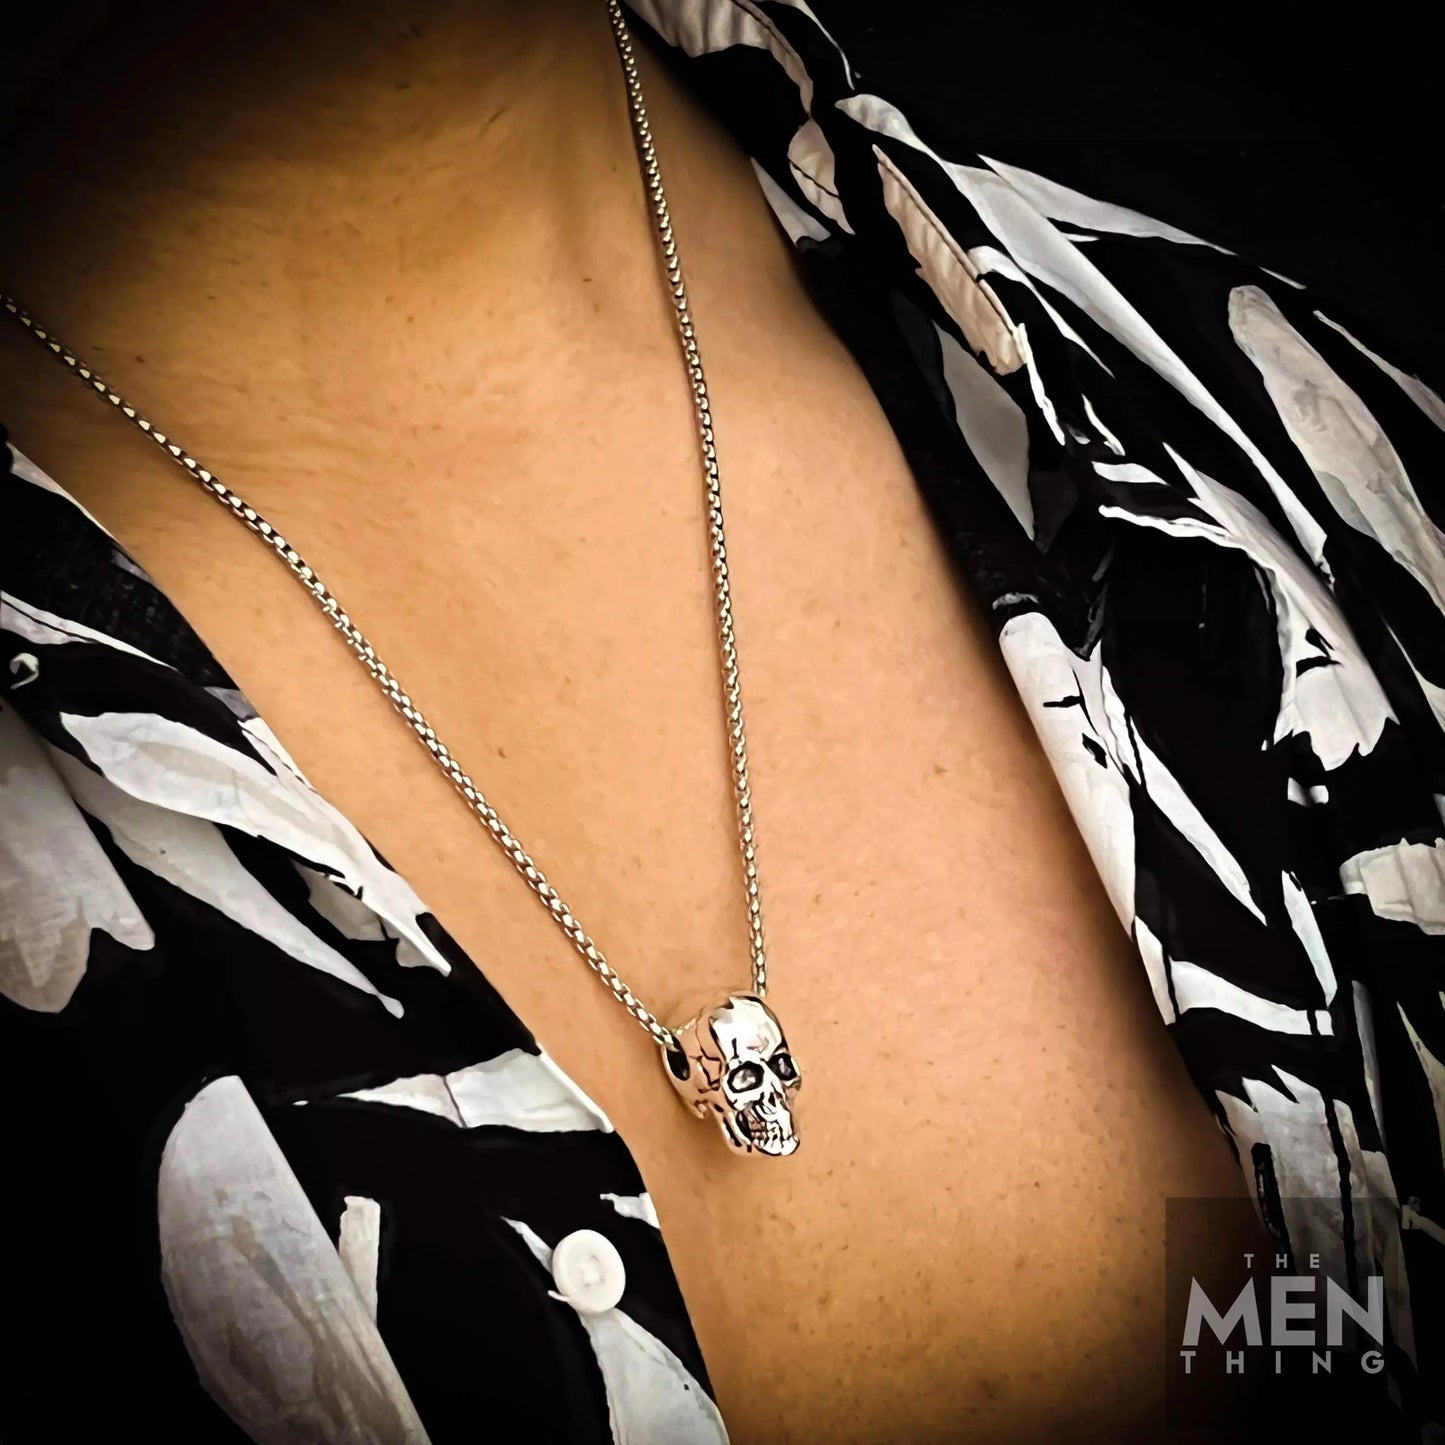 THE MEN THING Alloy Silver Skull Pendant with Pure Stainless Steel 24inch Chain for Men, European trending Style - Round Box Chain & Pendant for Men & Boy